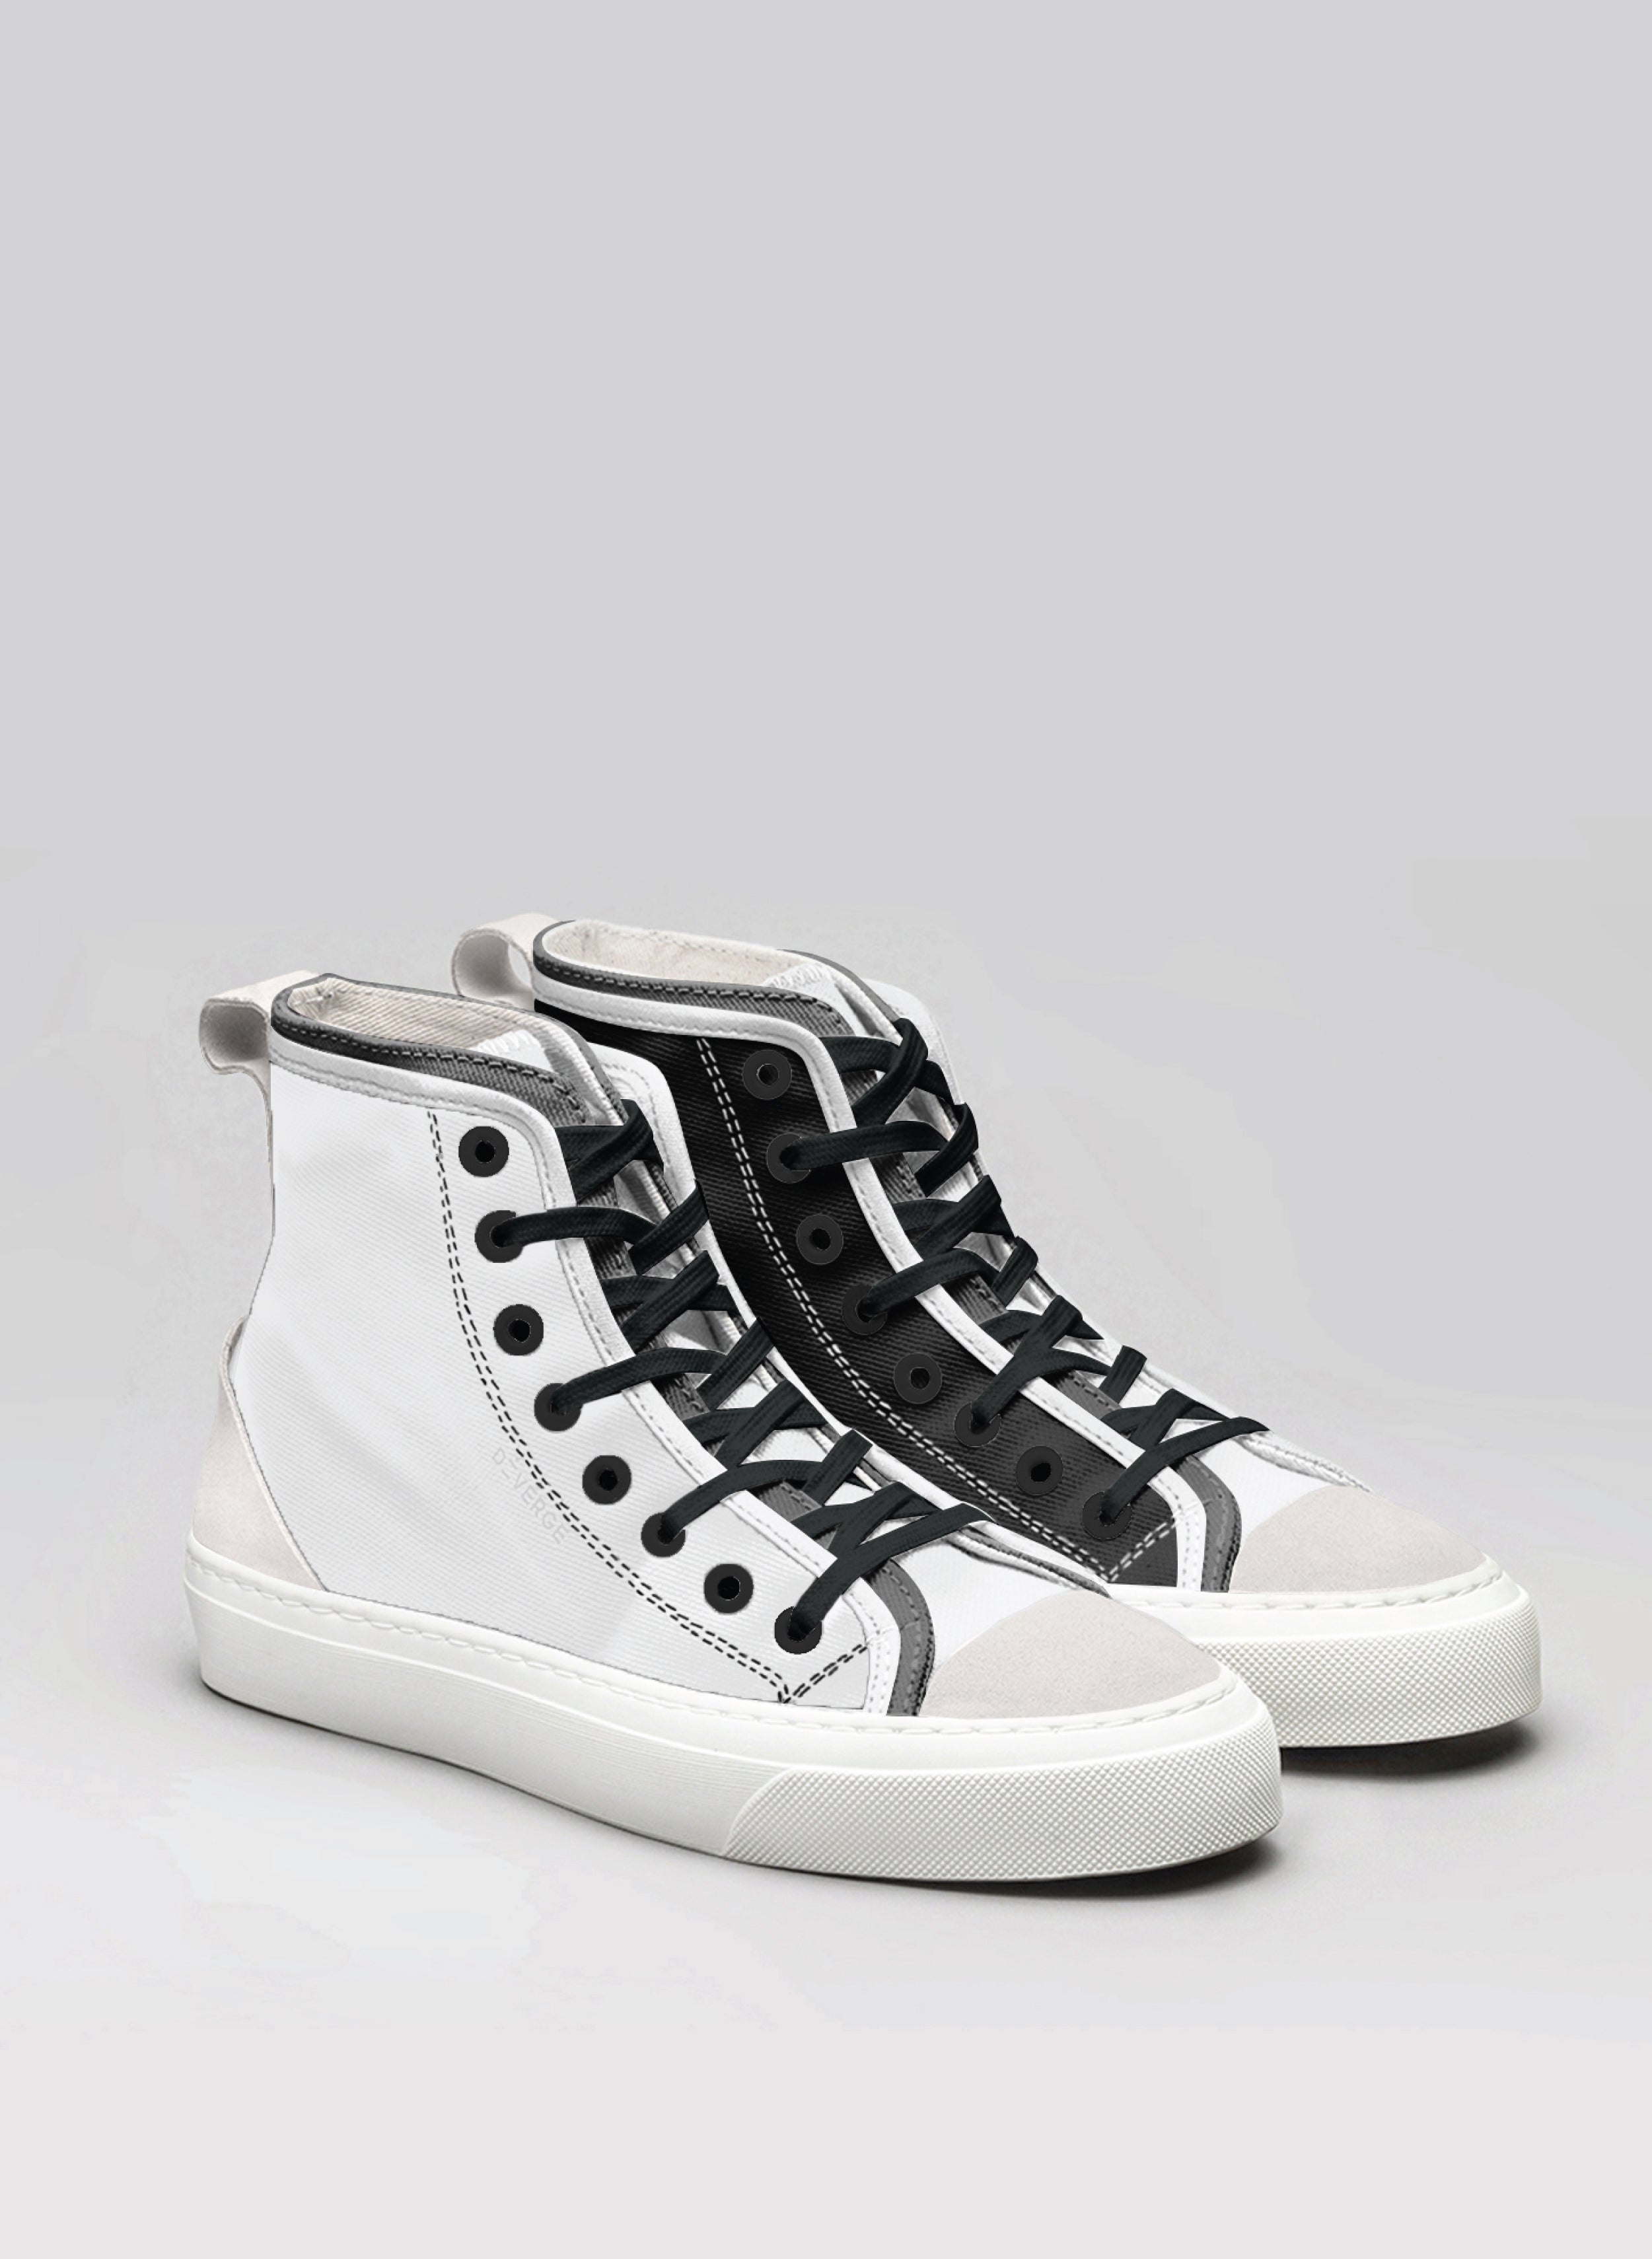 A black and white high top Diverge sneakers, a pair of custom shoes.